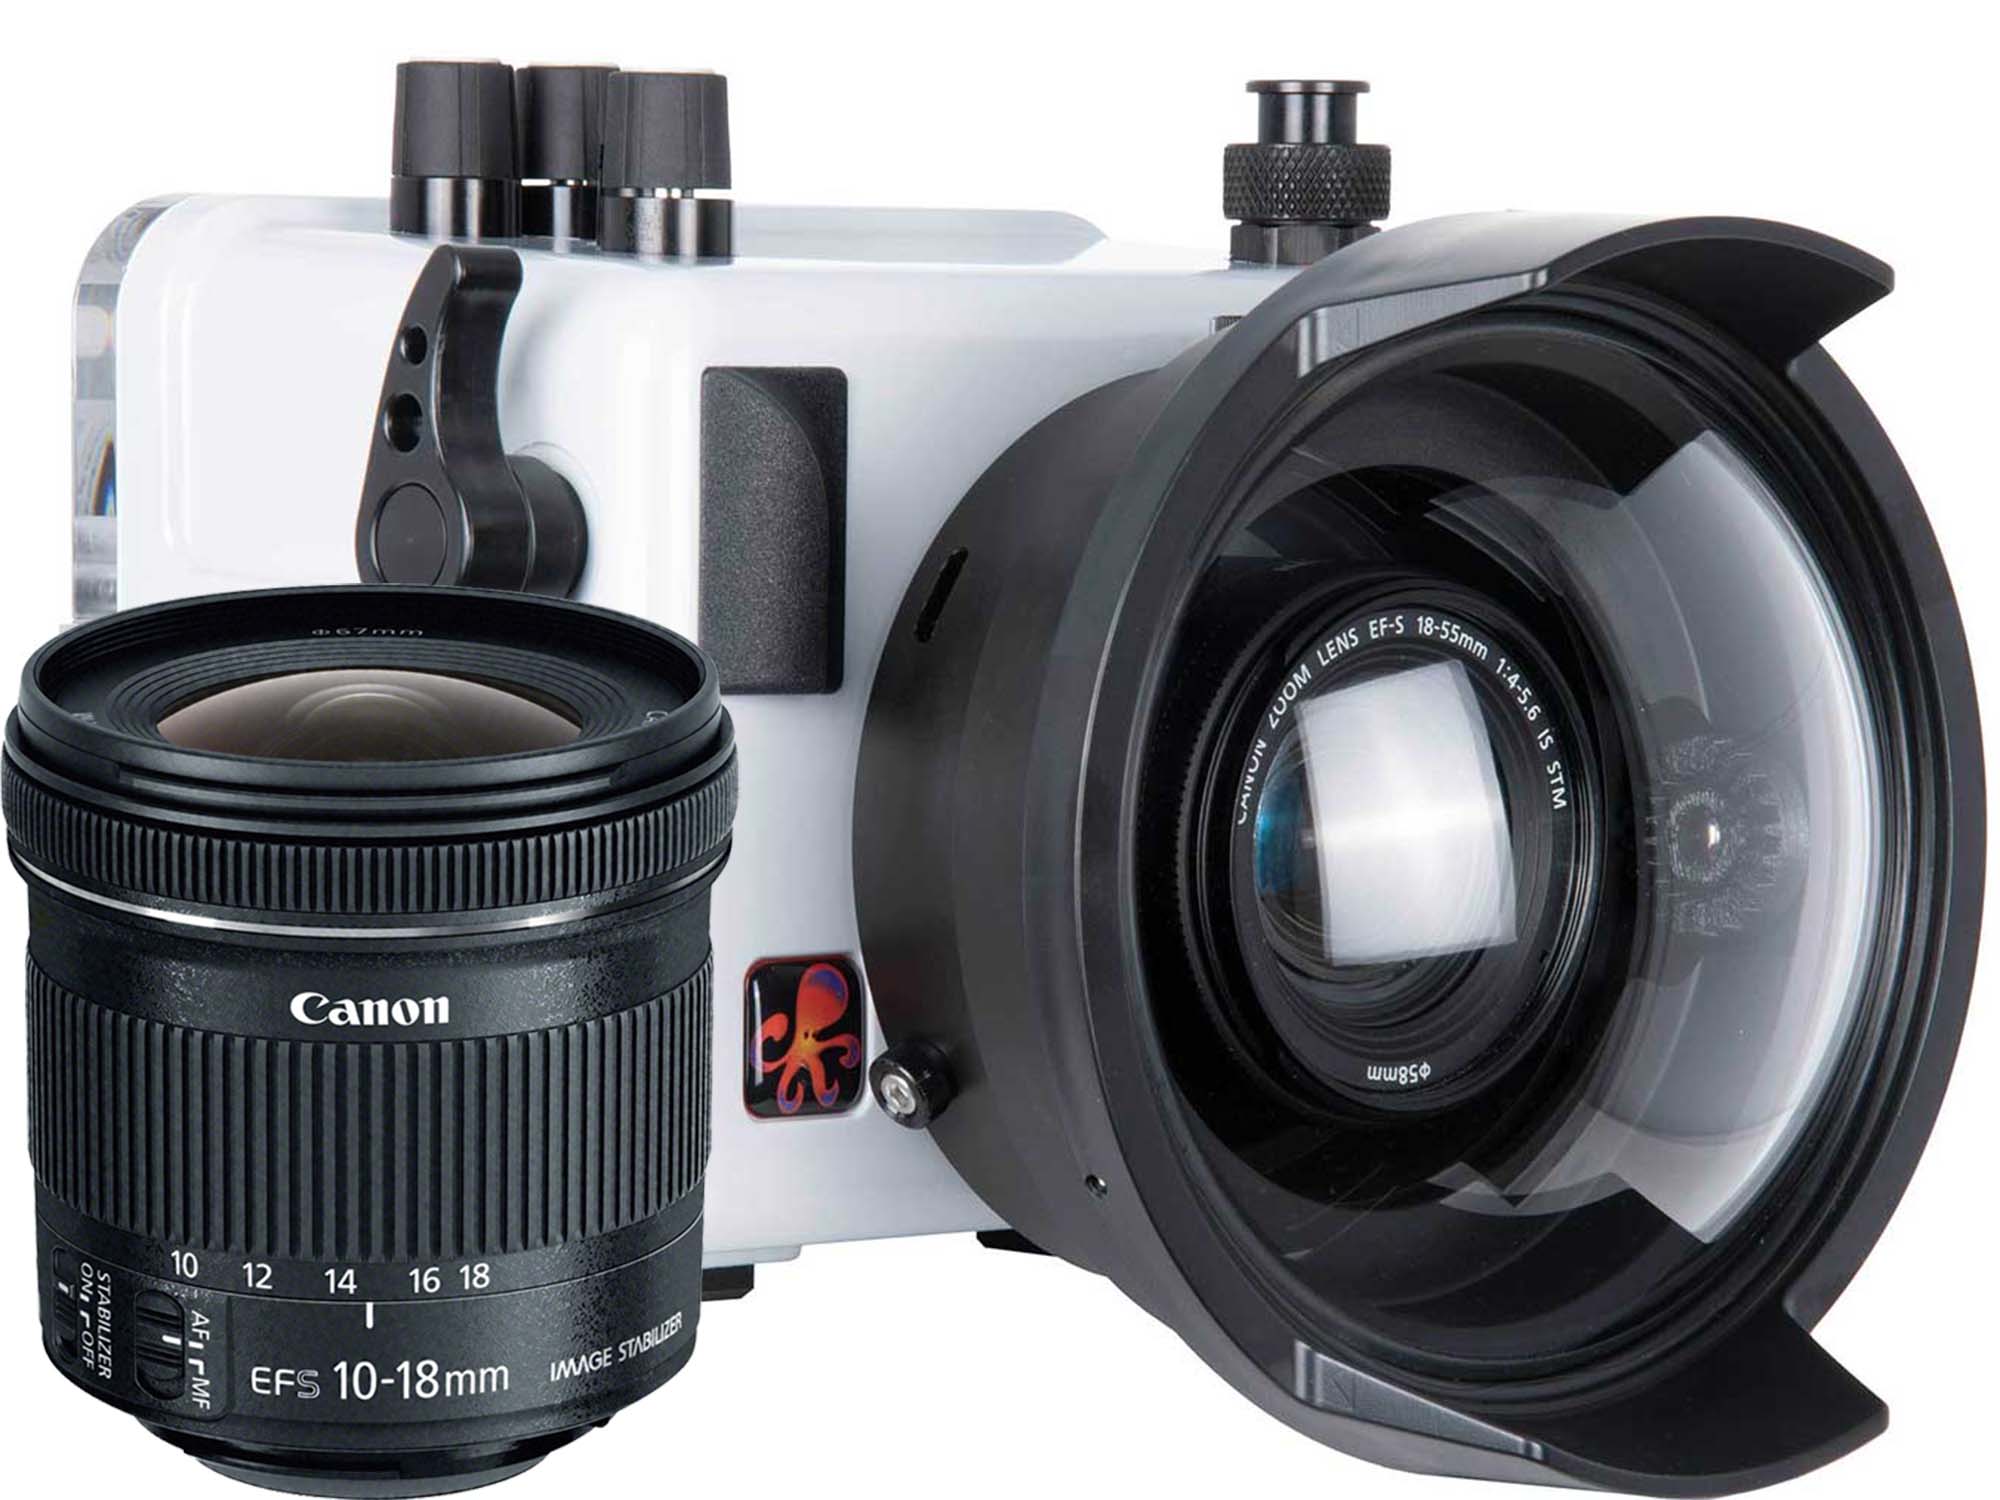 Canon EF-S 10-18mm Lens Installation on a DLM/C Housing [VIDEO]